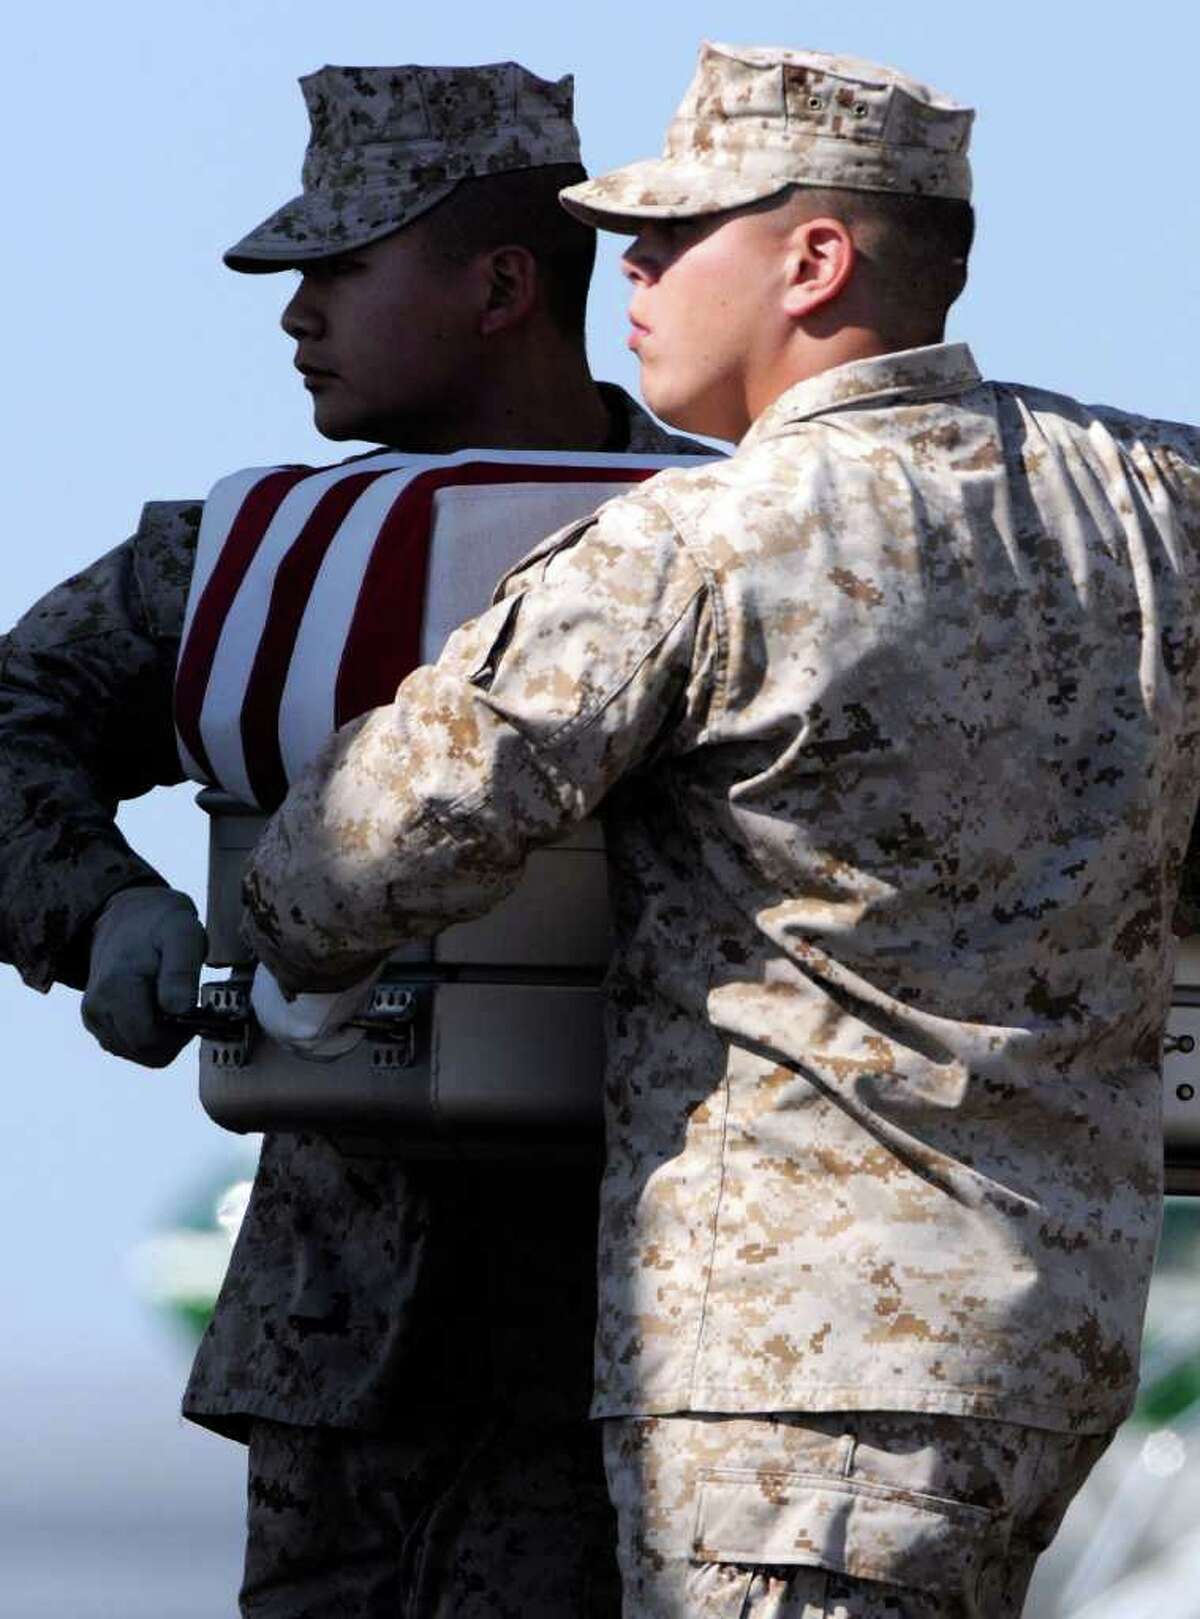 A Marine carry team moves a transfer case containing the remains of Lance Cpl. Benjamin W. Schmidt Saturday, Oct. 8, 2011 at Dover Air Force Base, Del. According to the Department of Defense, Schmidt, 24, of San Antonio, died Oct. 6, 2011 while conducting combat operations in Helmand, province, Afghanistan.